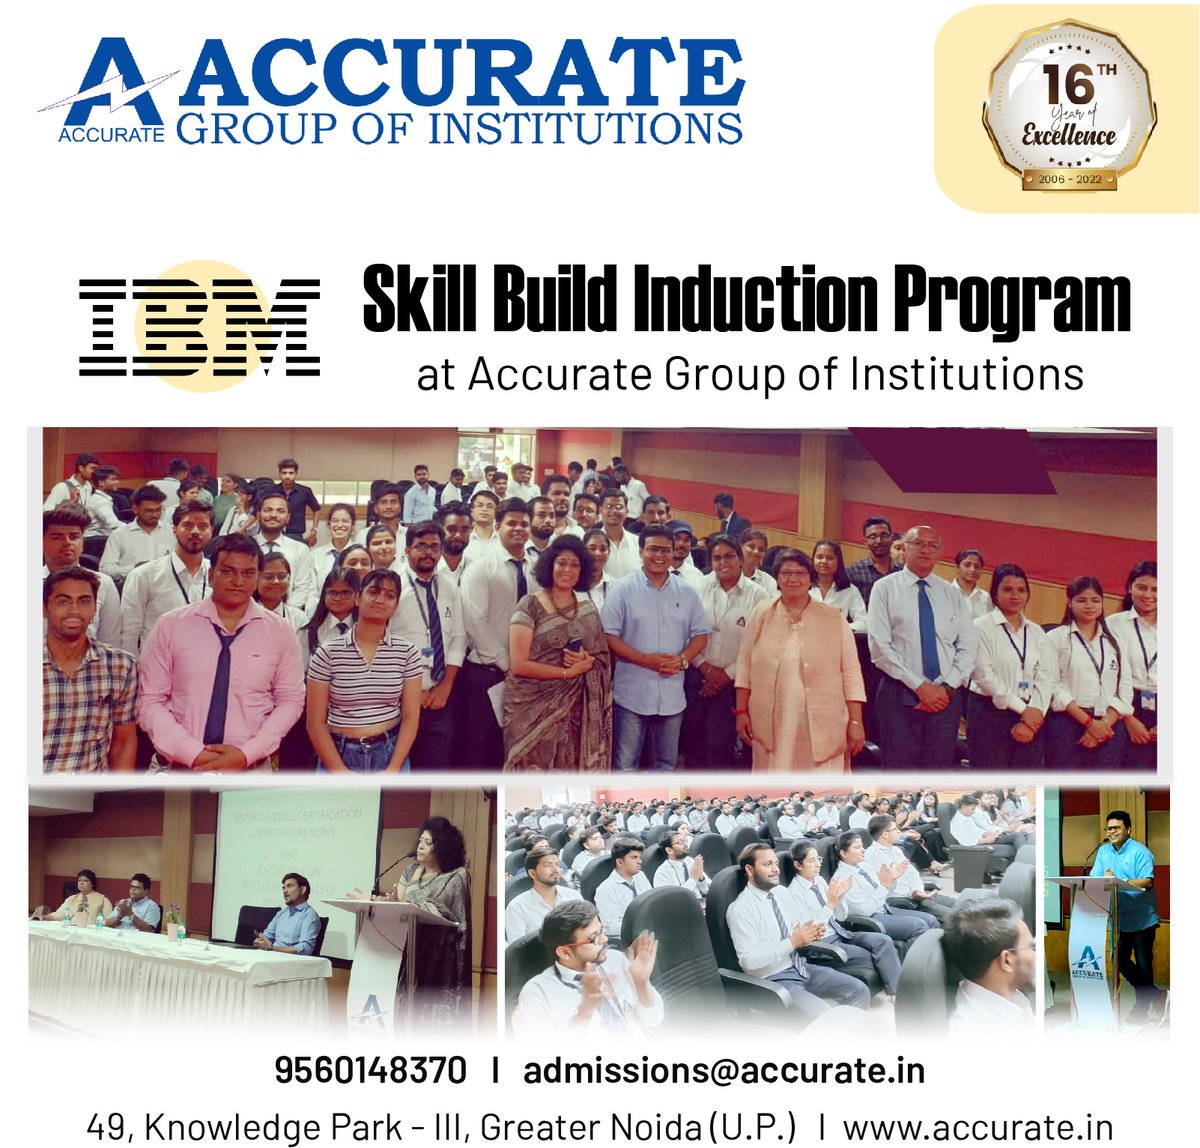 IBM Skill Build Induction Program at Accurate Group of Institutions.

Read More: accurate.in

#GreaterNoida #Institute #PGDMCourse #PGDMAdmission #PGDM #PGDMInstitute #PGDMBestCollege #MBA #MBACollege #MBAAdmission #PGDMProgram #IBM #SkillBuildInductionProgram